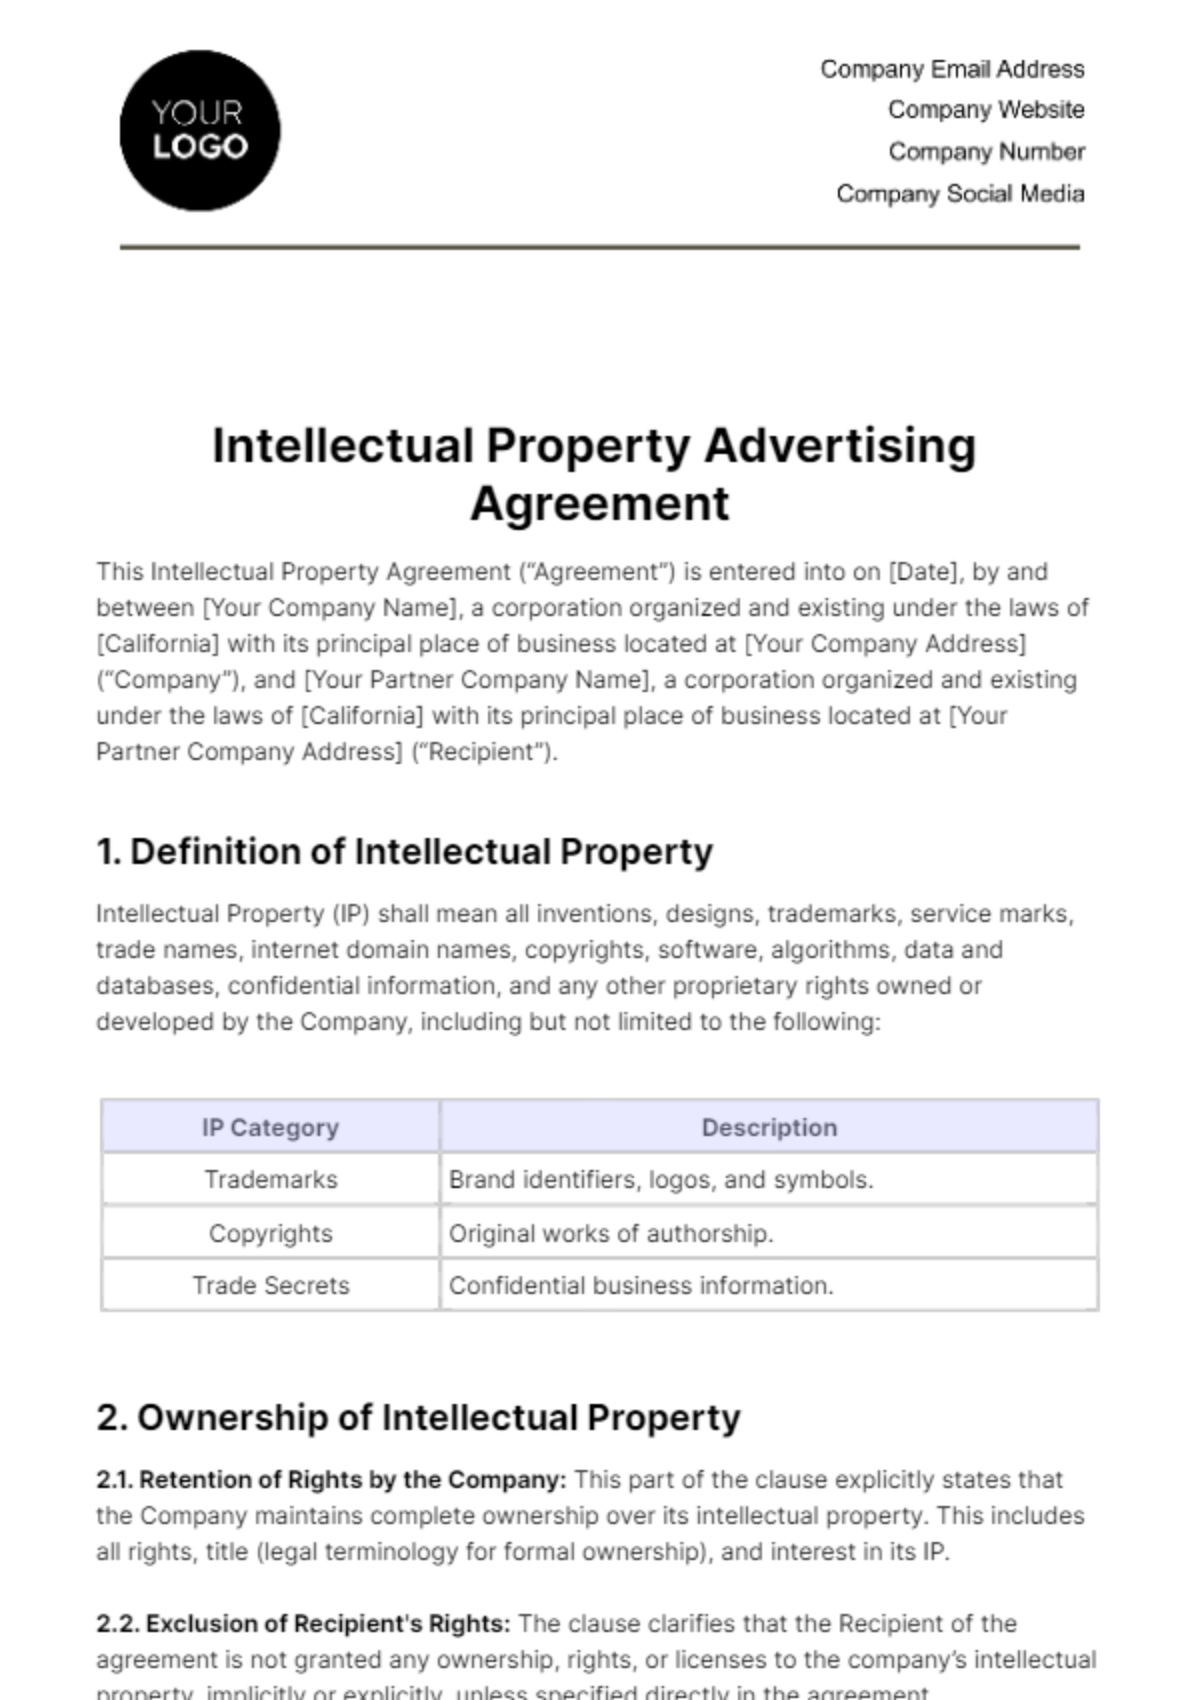 Free Intellectual Property Advertising Agreement Template